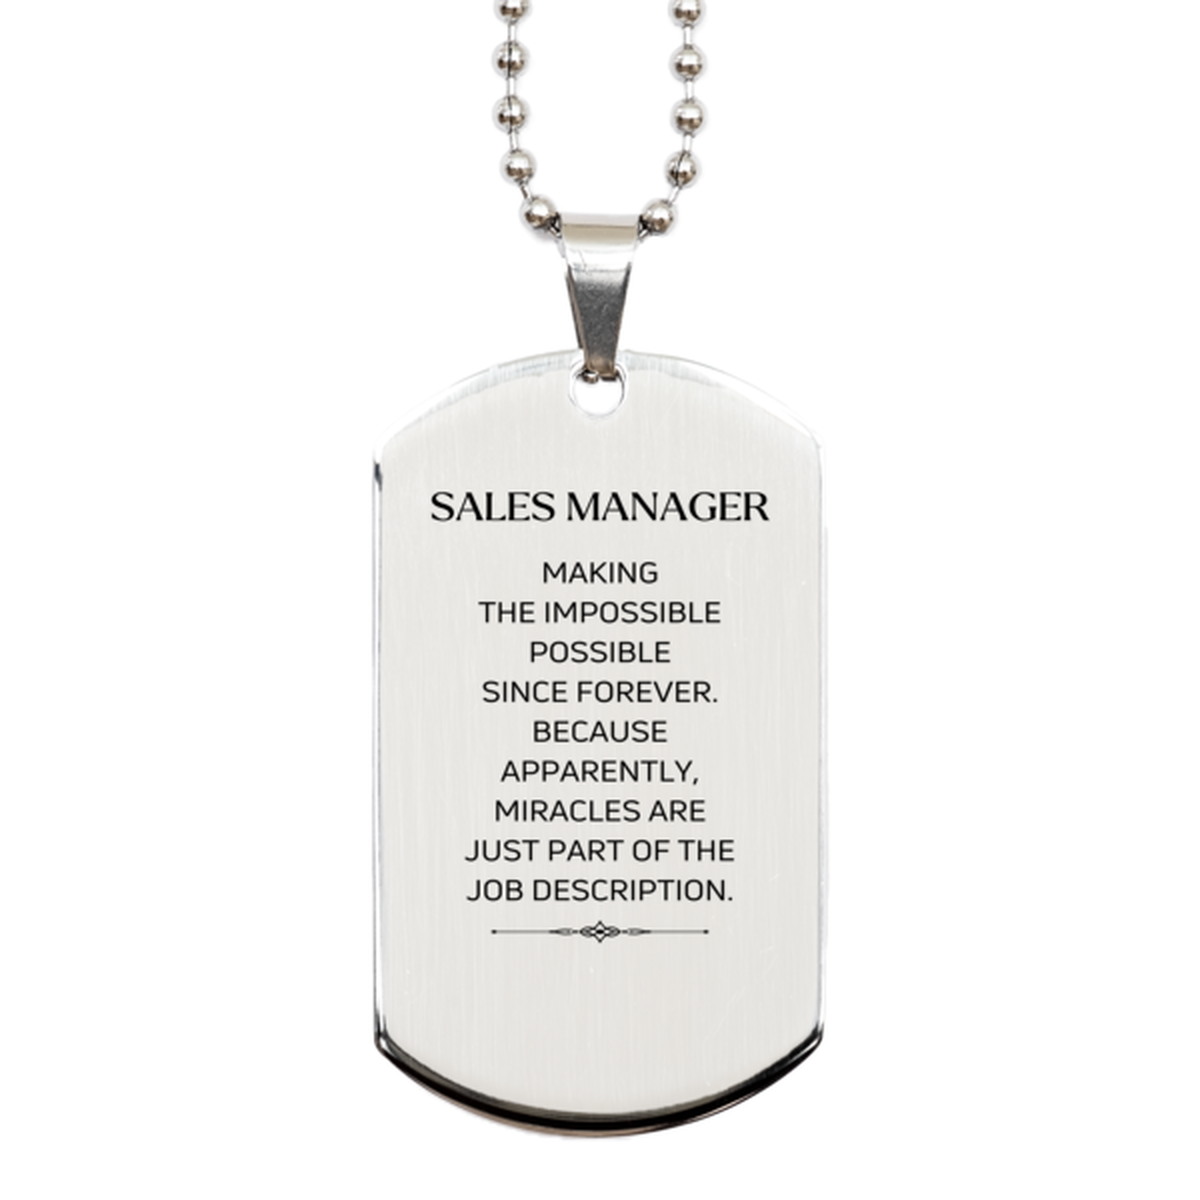 Funny Sales Manager Gifts, Miracles are just part of the job description, Inspirational Birthday Silver Dog Tag For Sales Manager, Men, Women, Coworkers, Friends, Boss